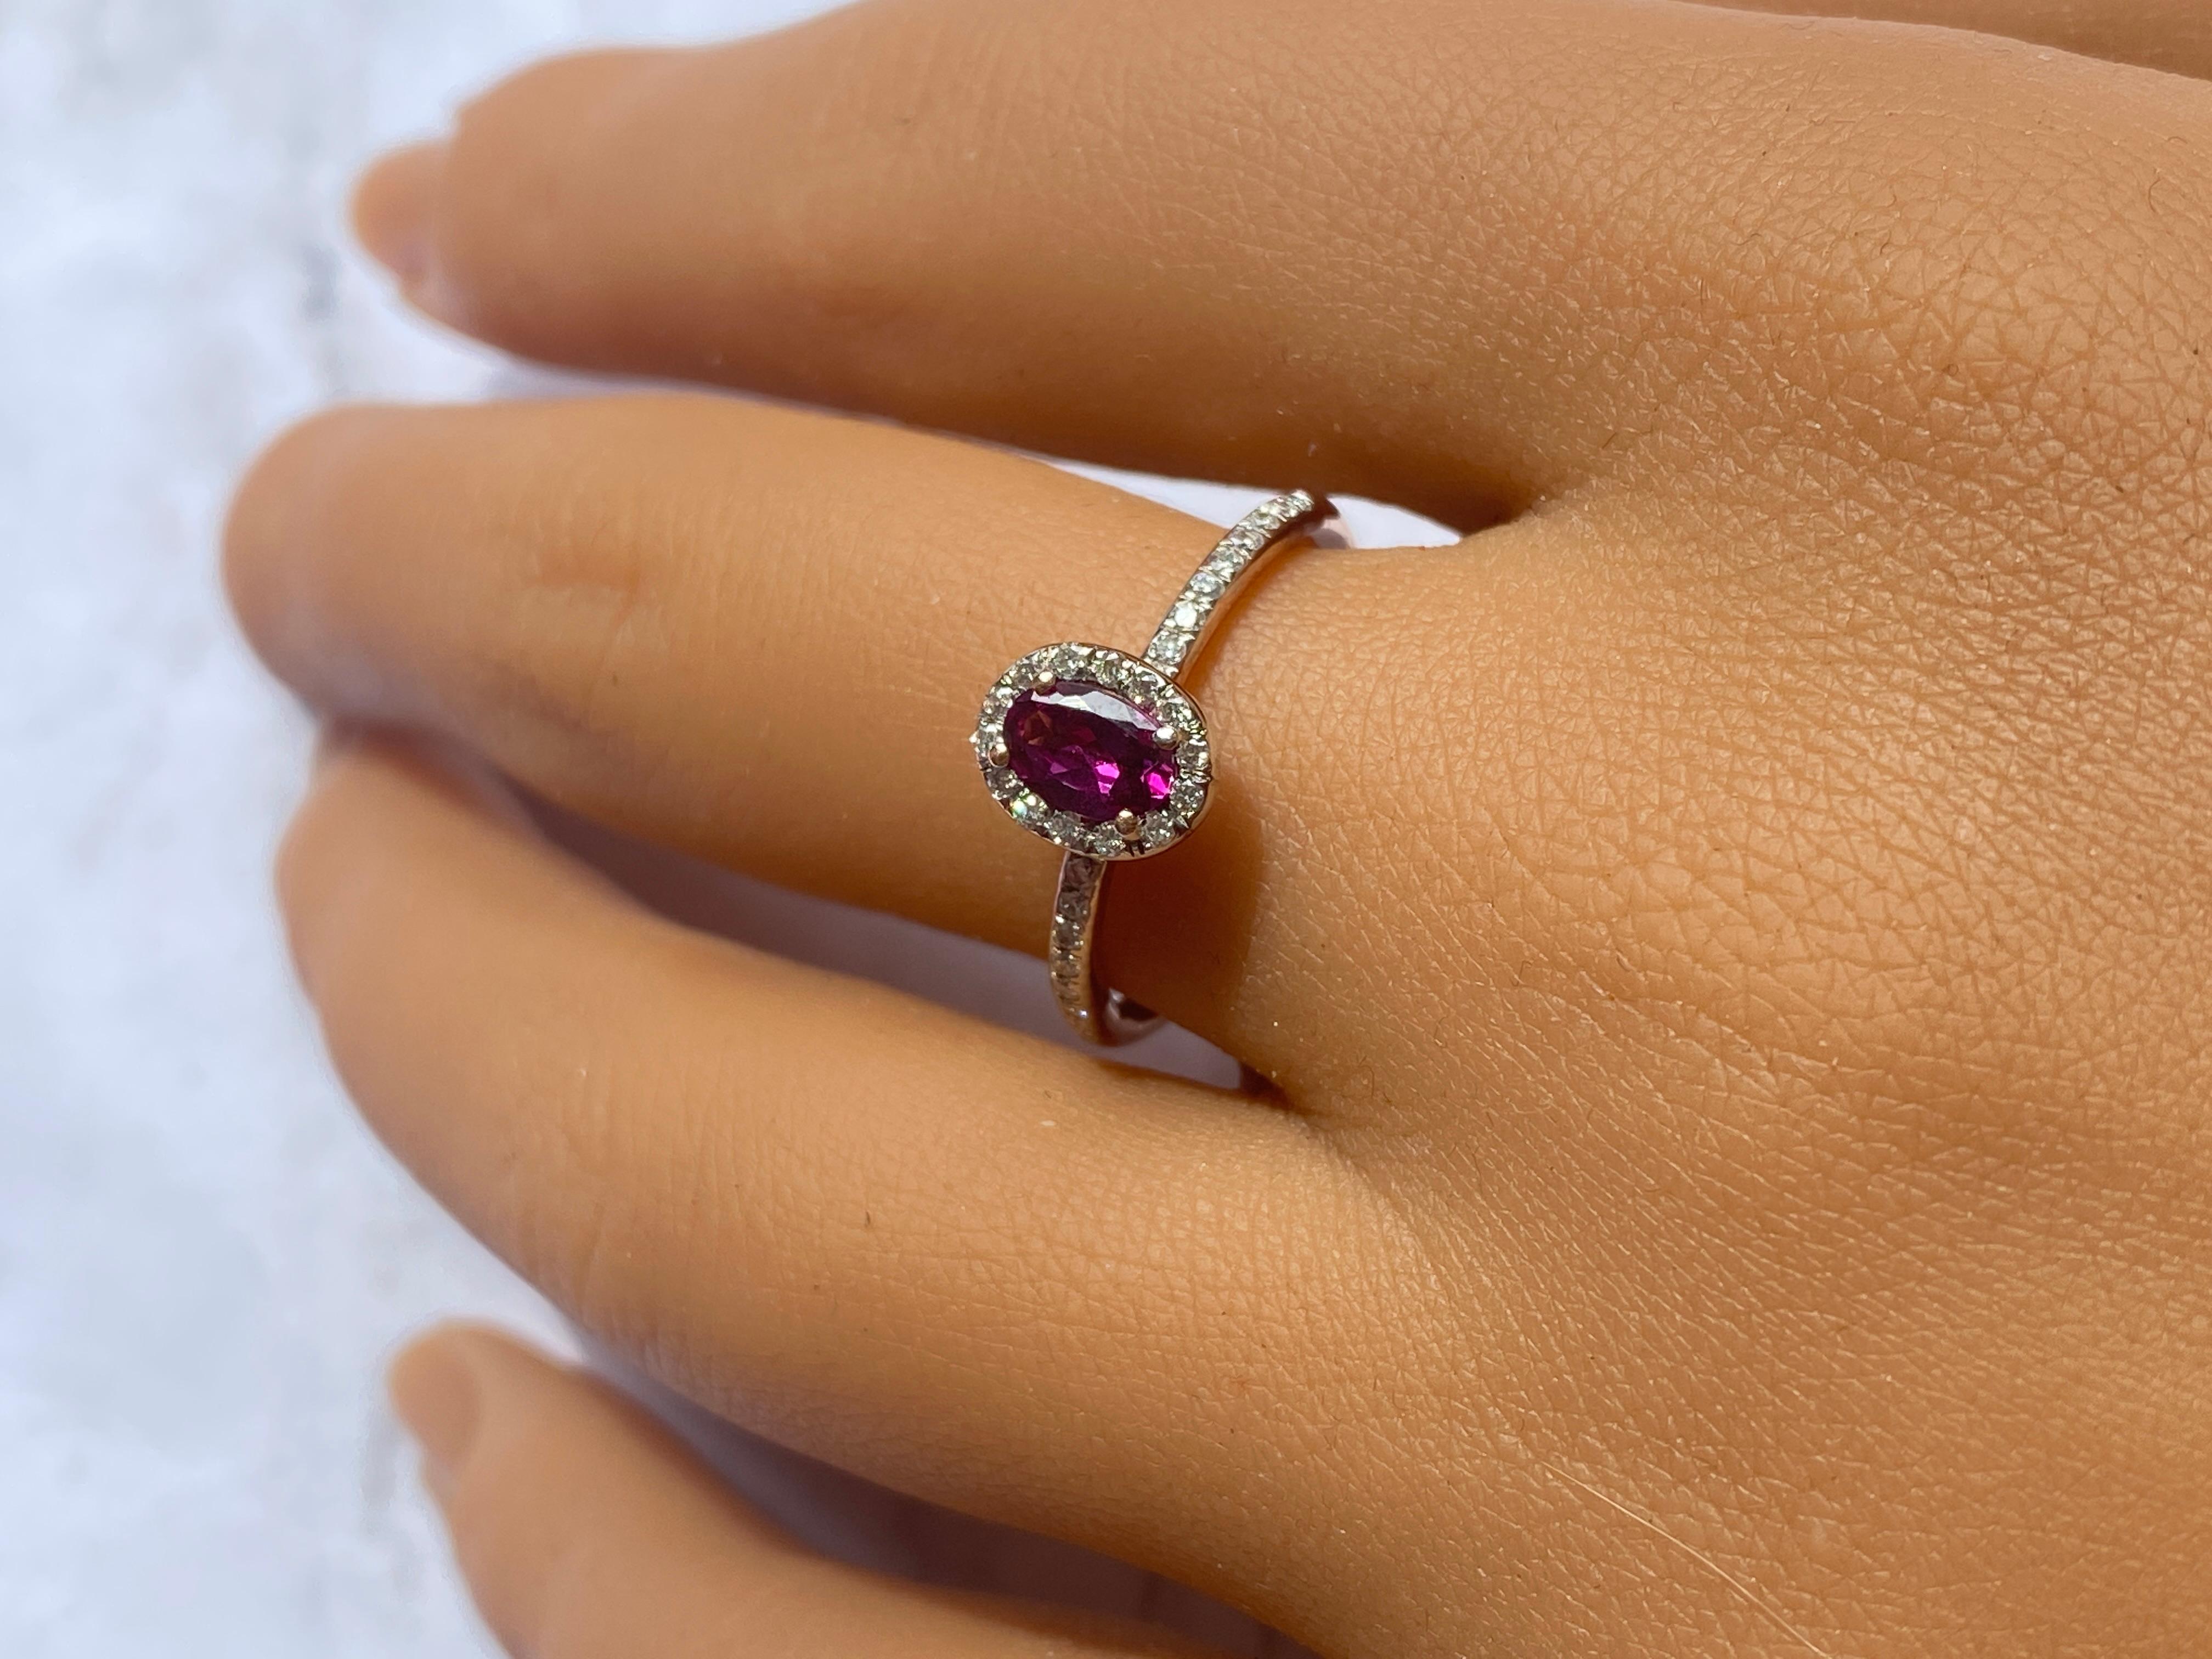 For Sale:  Gemstone Solitaire Ring Stack, 14k Solid Gold Rings with Natural Round Diamonds 3